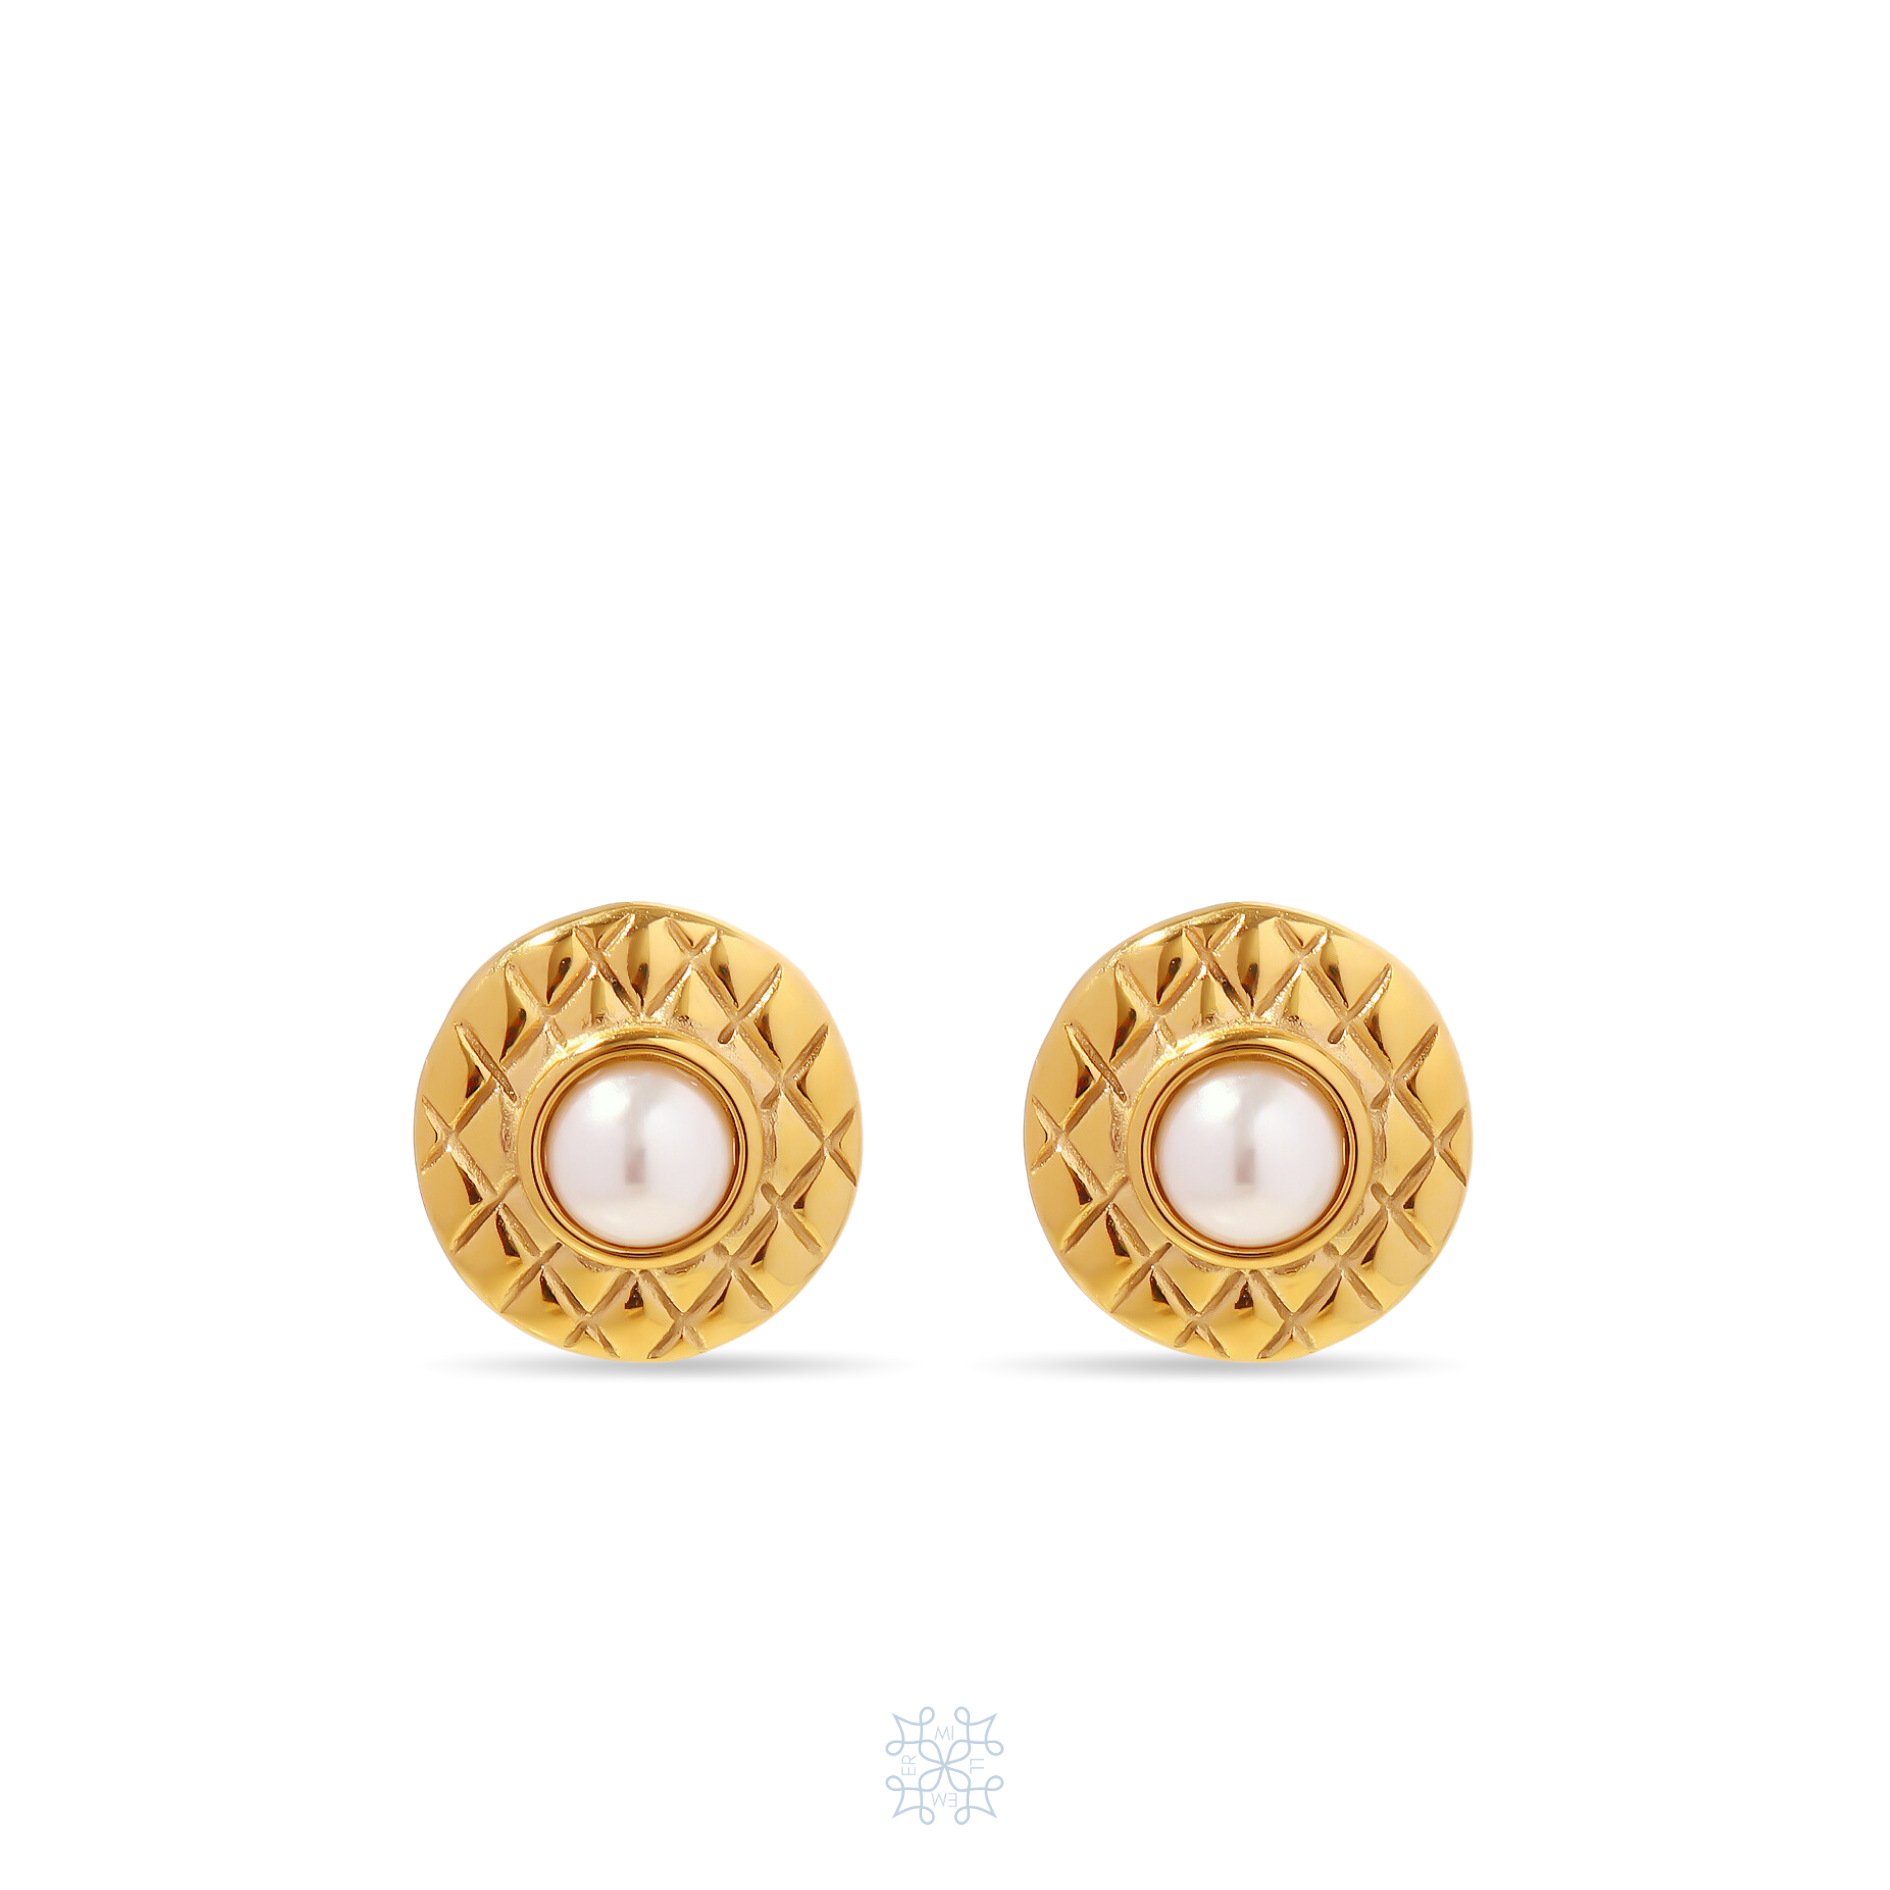 Square Stud earrrings with a white pearl in the middle. the gold corcle part is like a disc engraved in rhombus shapes. LUCY Pearl Stud Earrings